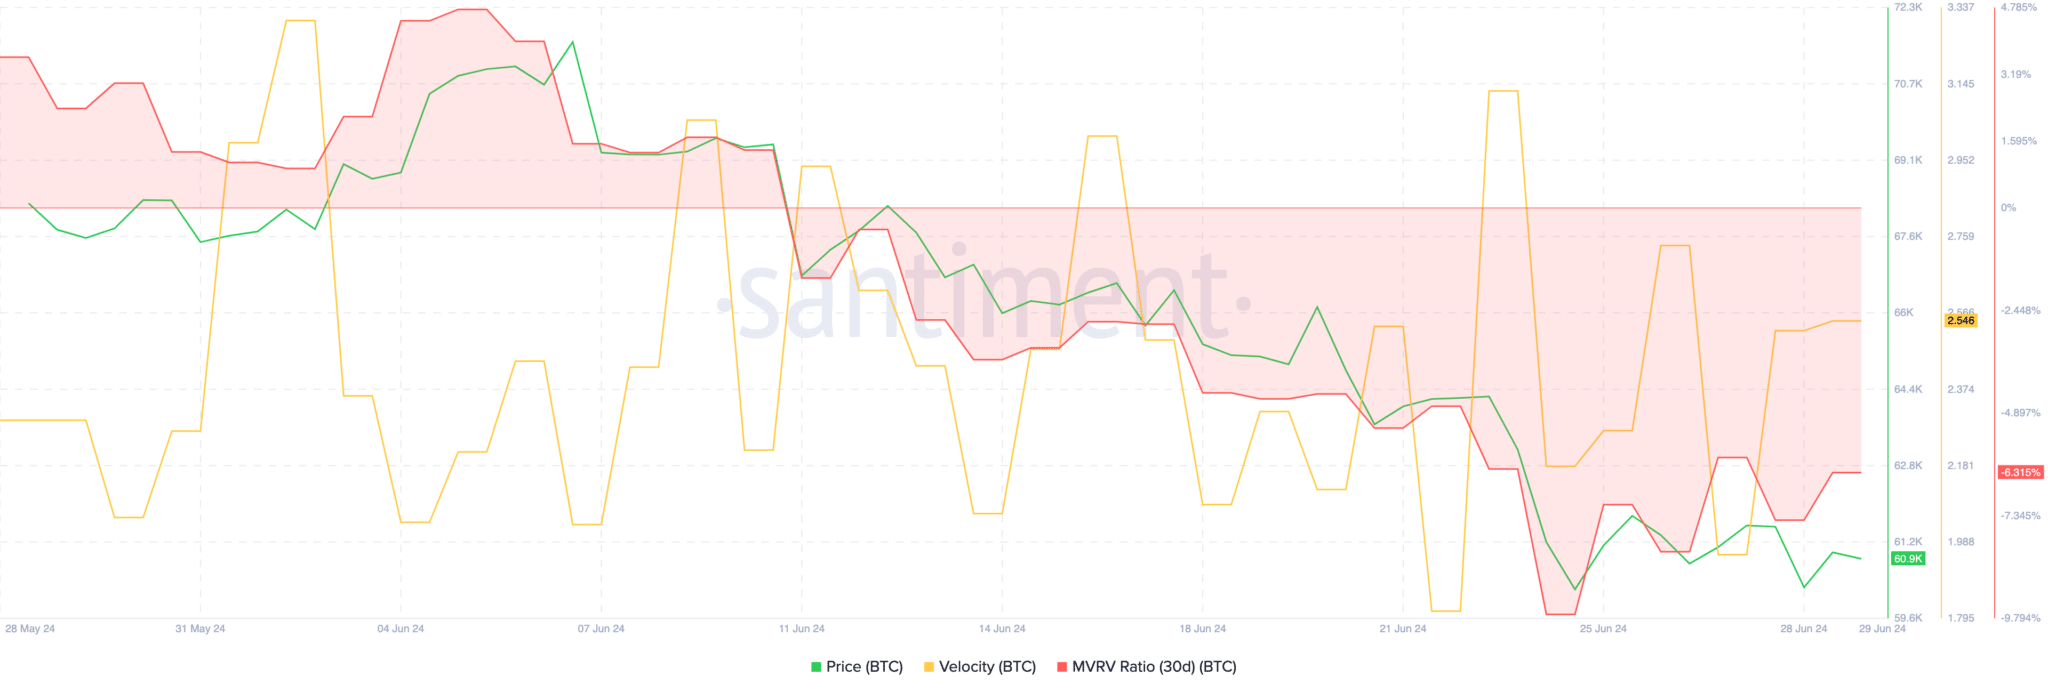 santiment-velocity at which BTC was trading